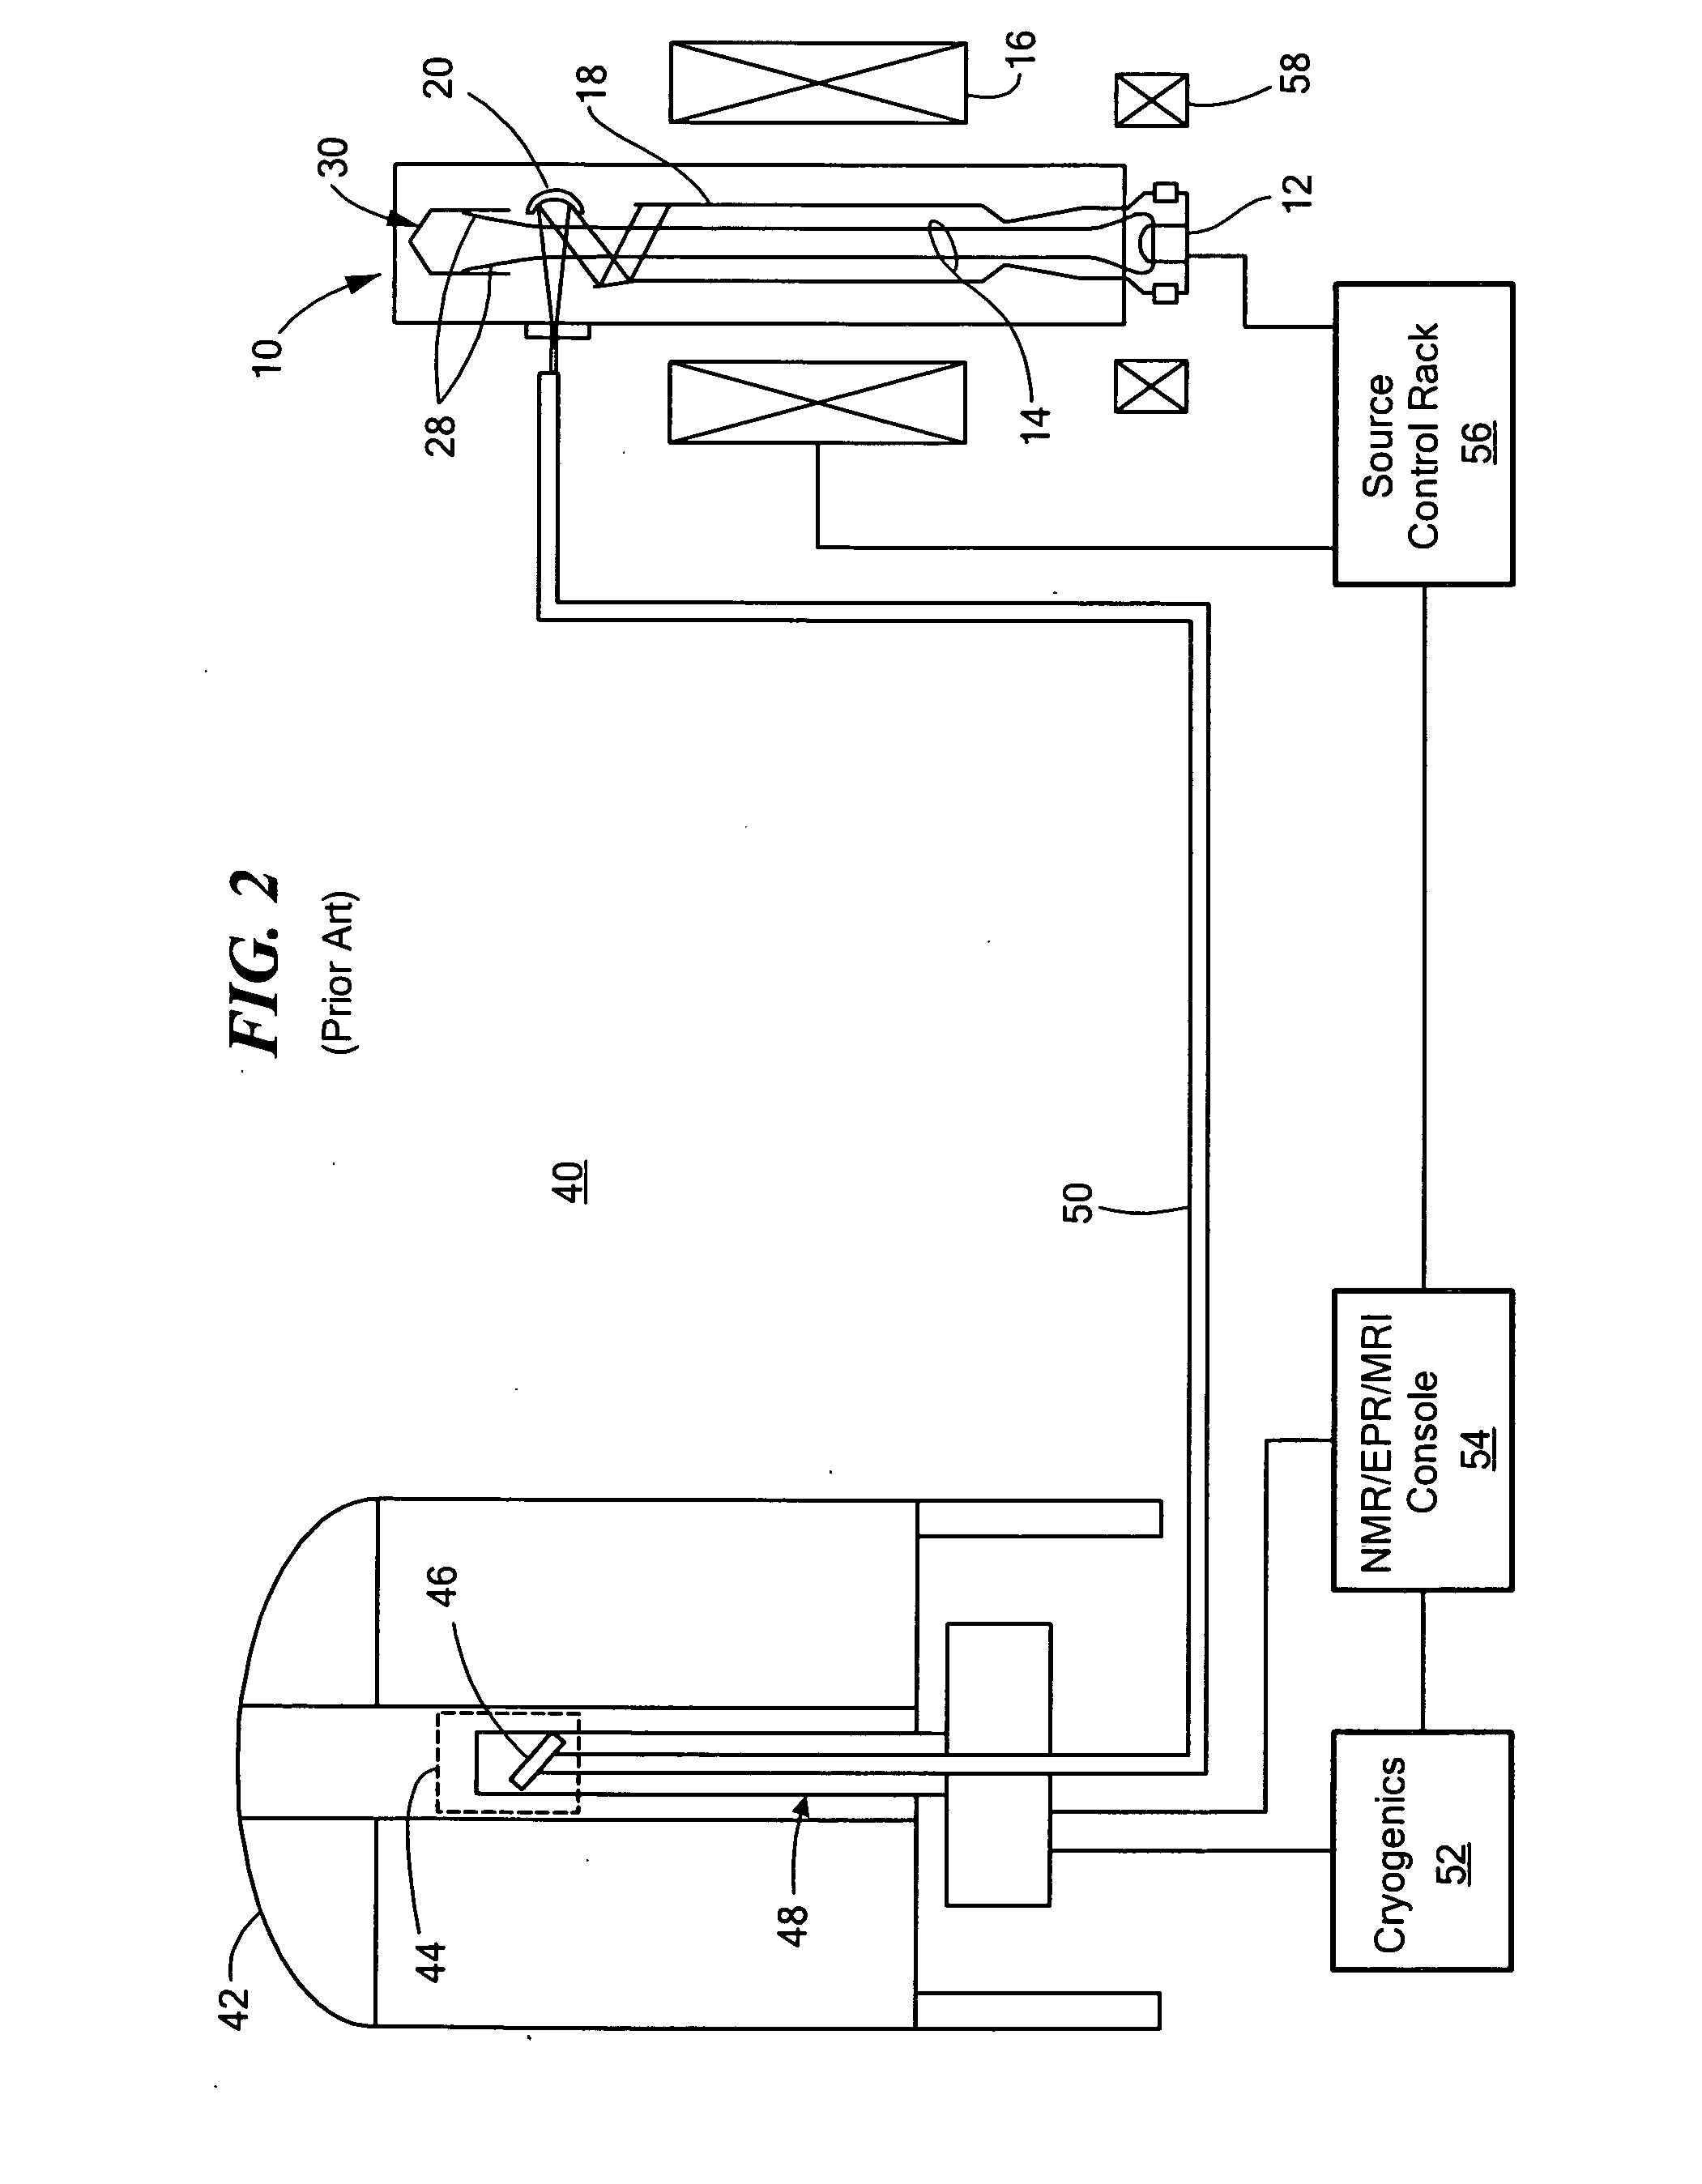 Integrated high-frequency generator system utilizing the magnetic field of the target application